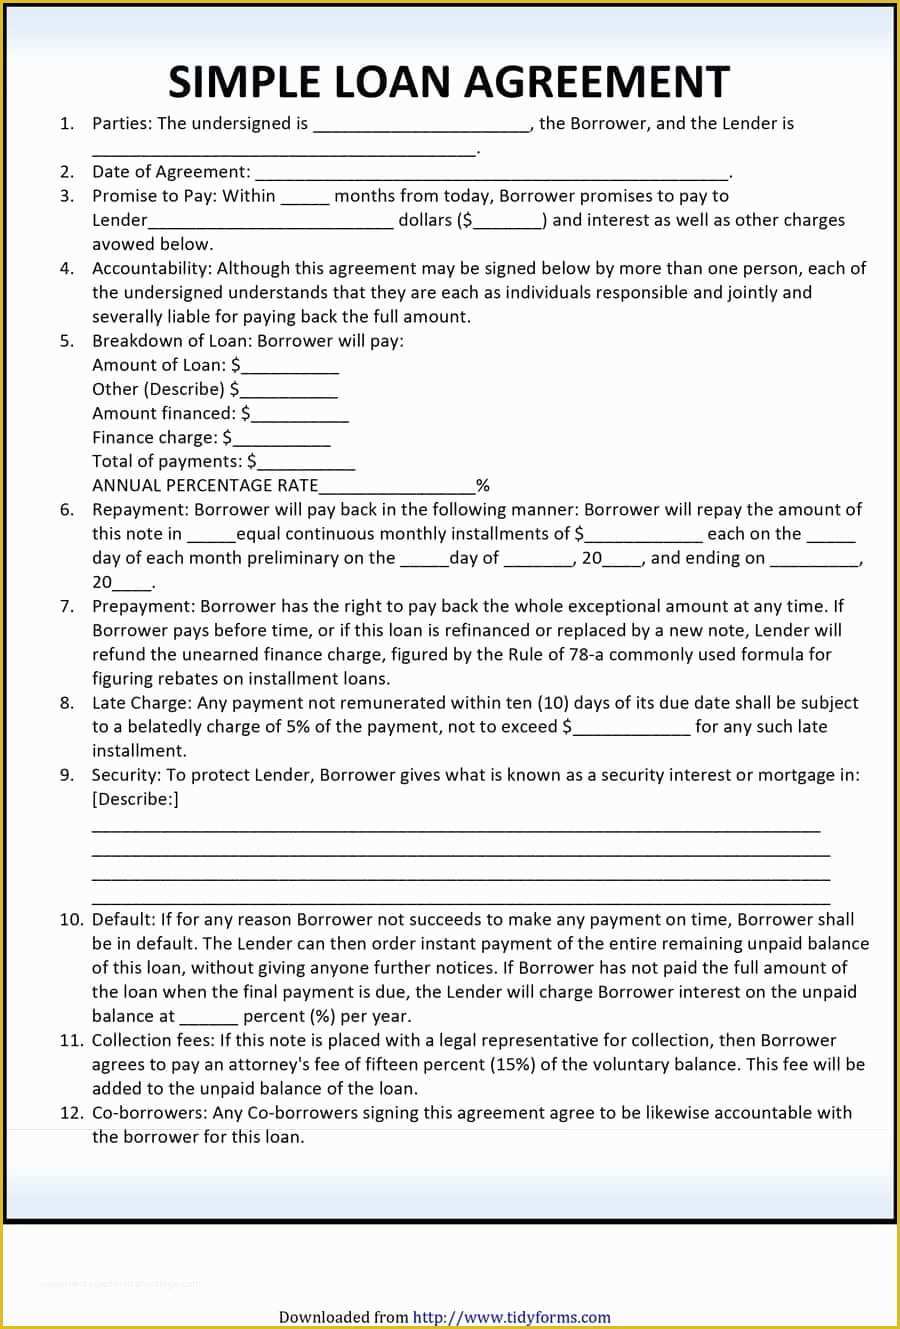 Money Loan Agreement Template Free Of 40 Free Loan Agreement Templates [word & Pdf] Template Lab